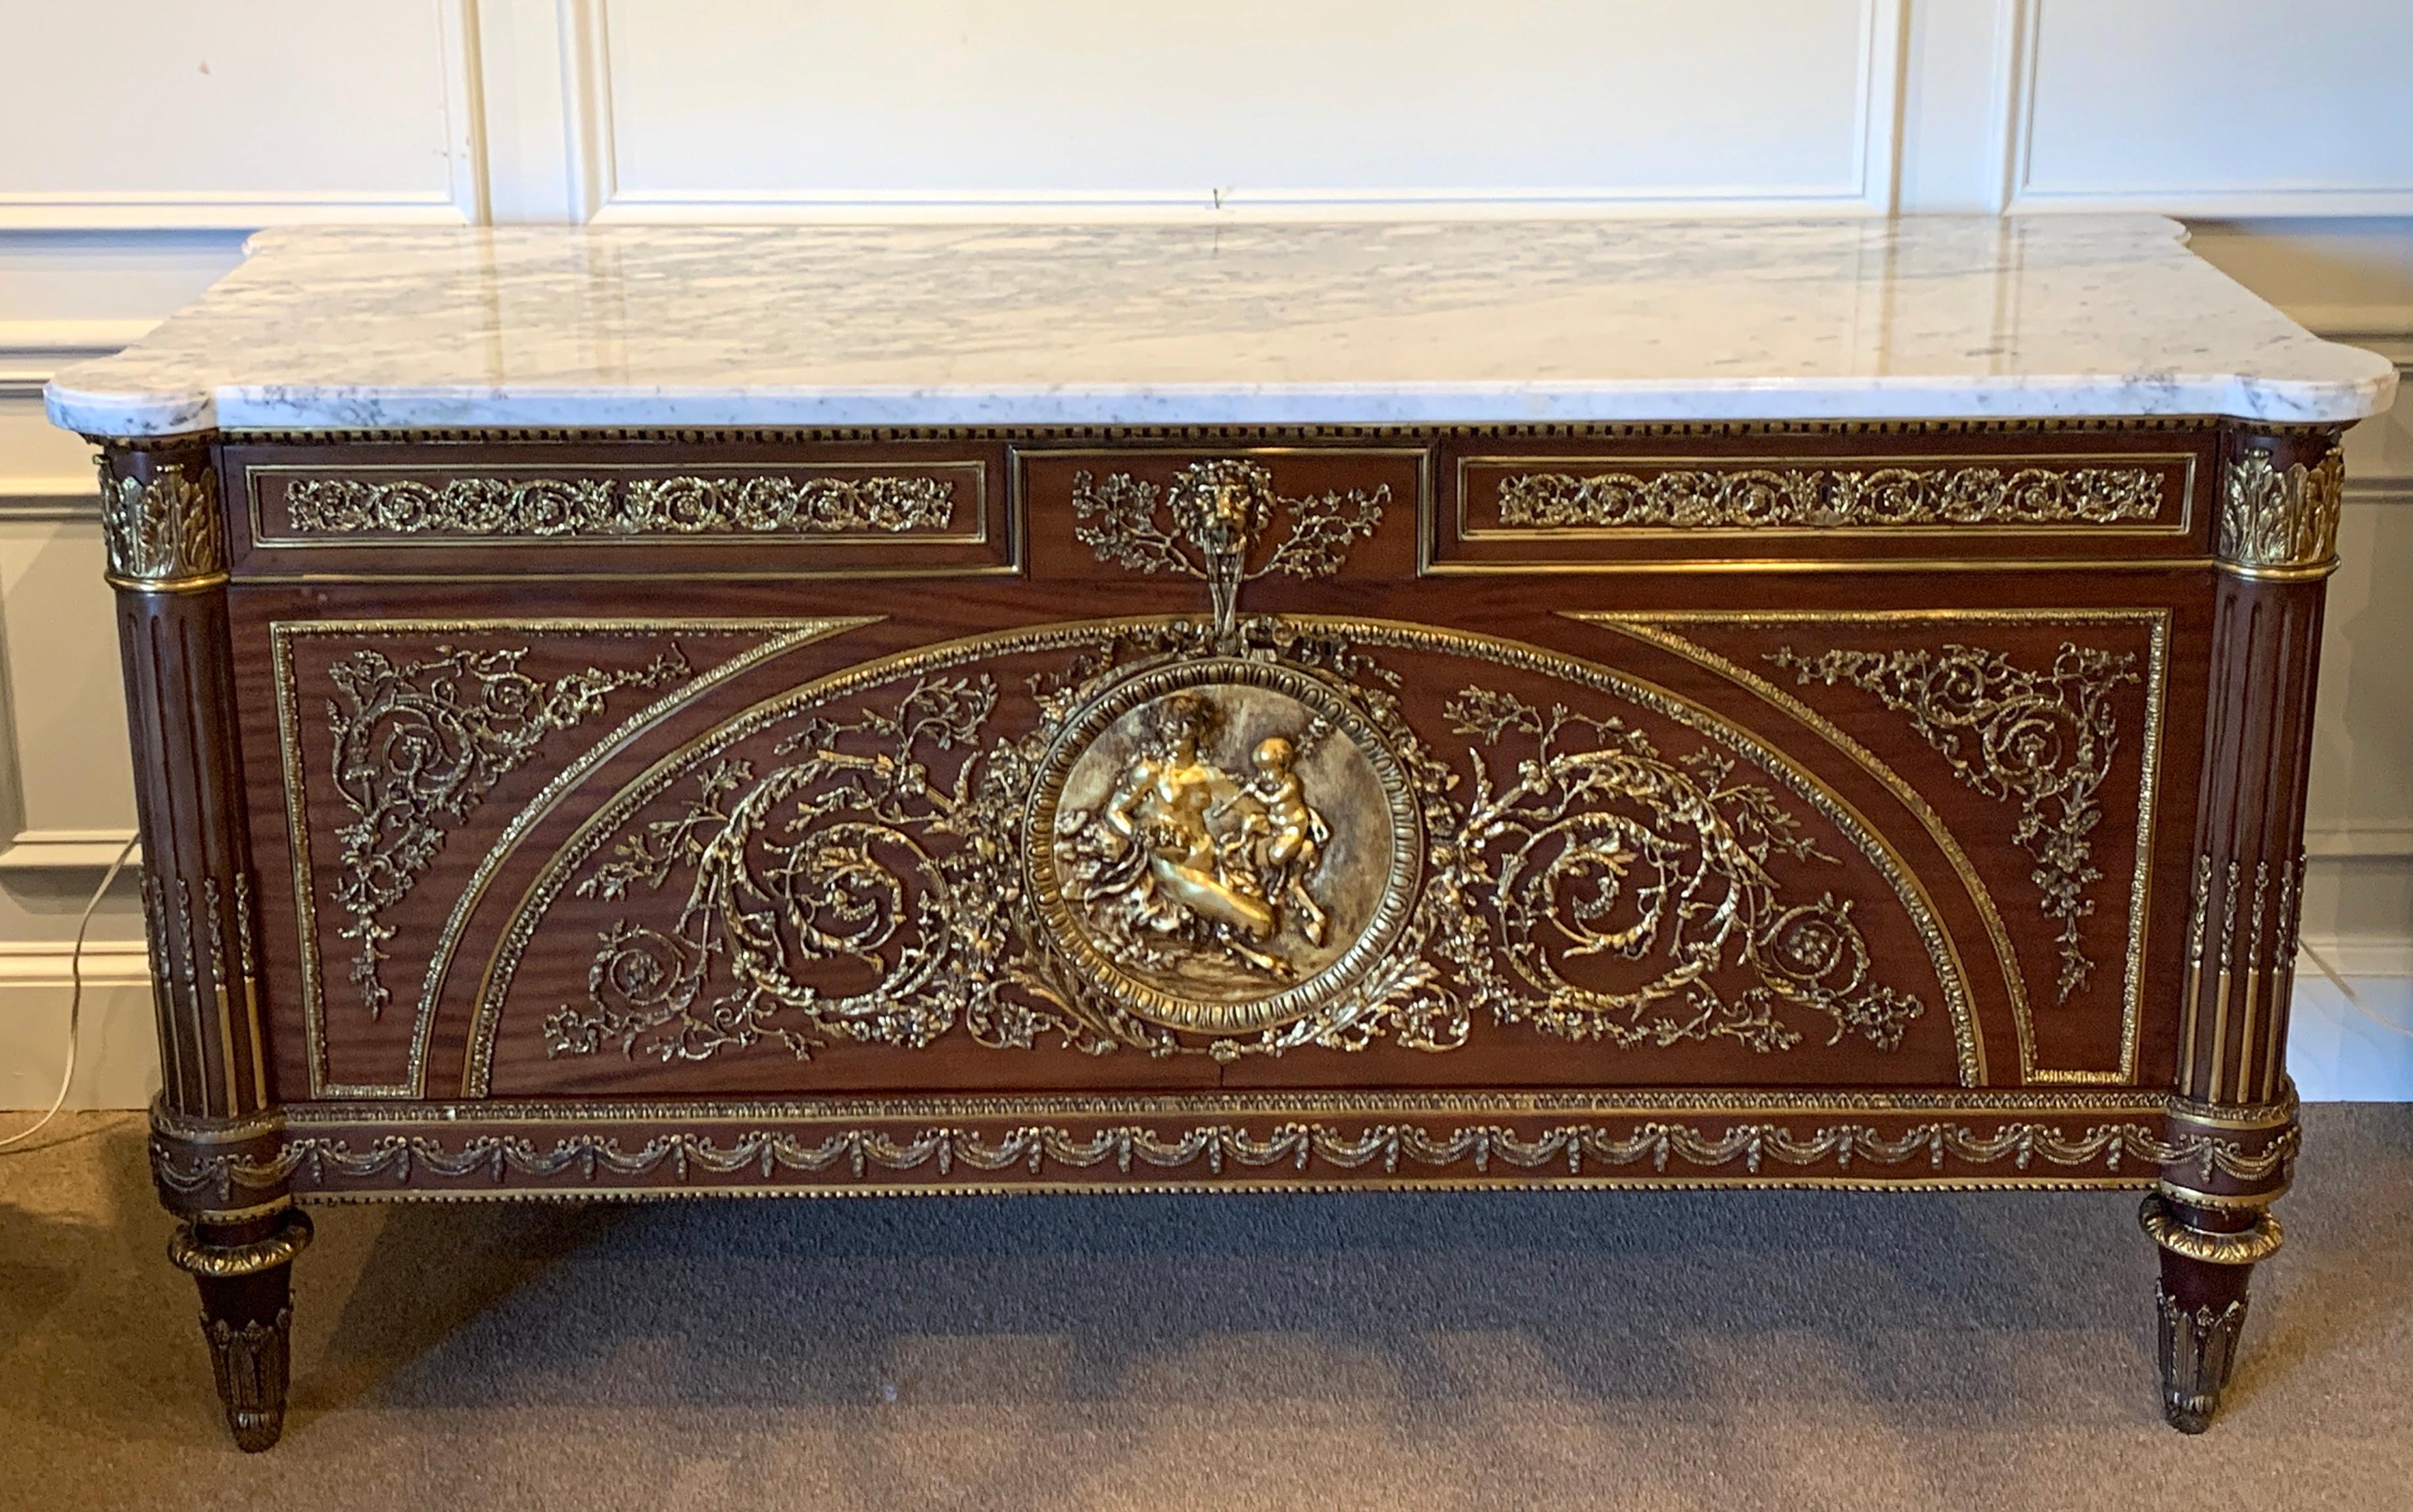 A 20th century Louis XVI style Guillaume Benneman from a model by Joseph Stöckel. The original supplied to Marie-Antoinette for the Salon des Jeux at Fontainebleau in 1786. This is an exceptional cabinet made example of the famed commode. With Fine